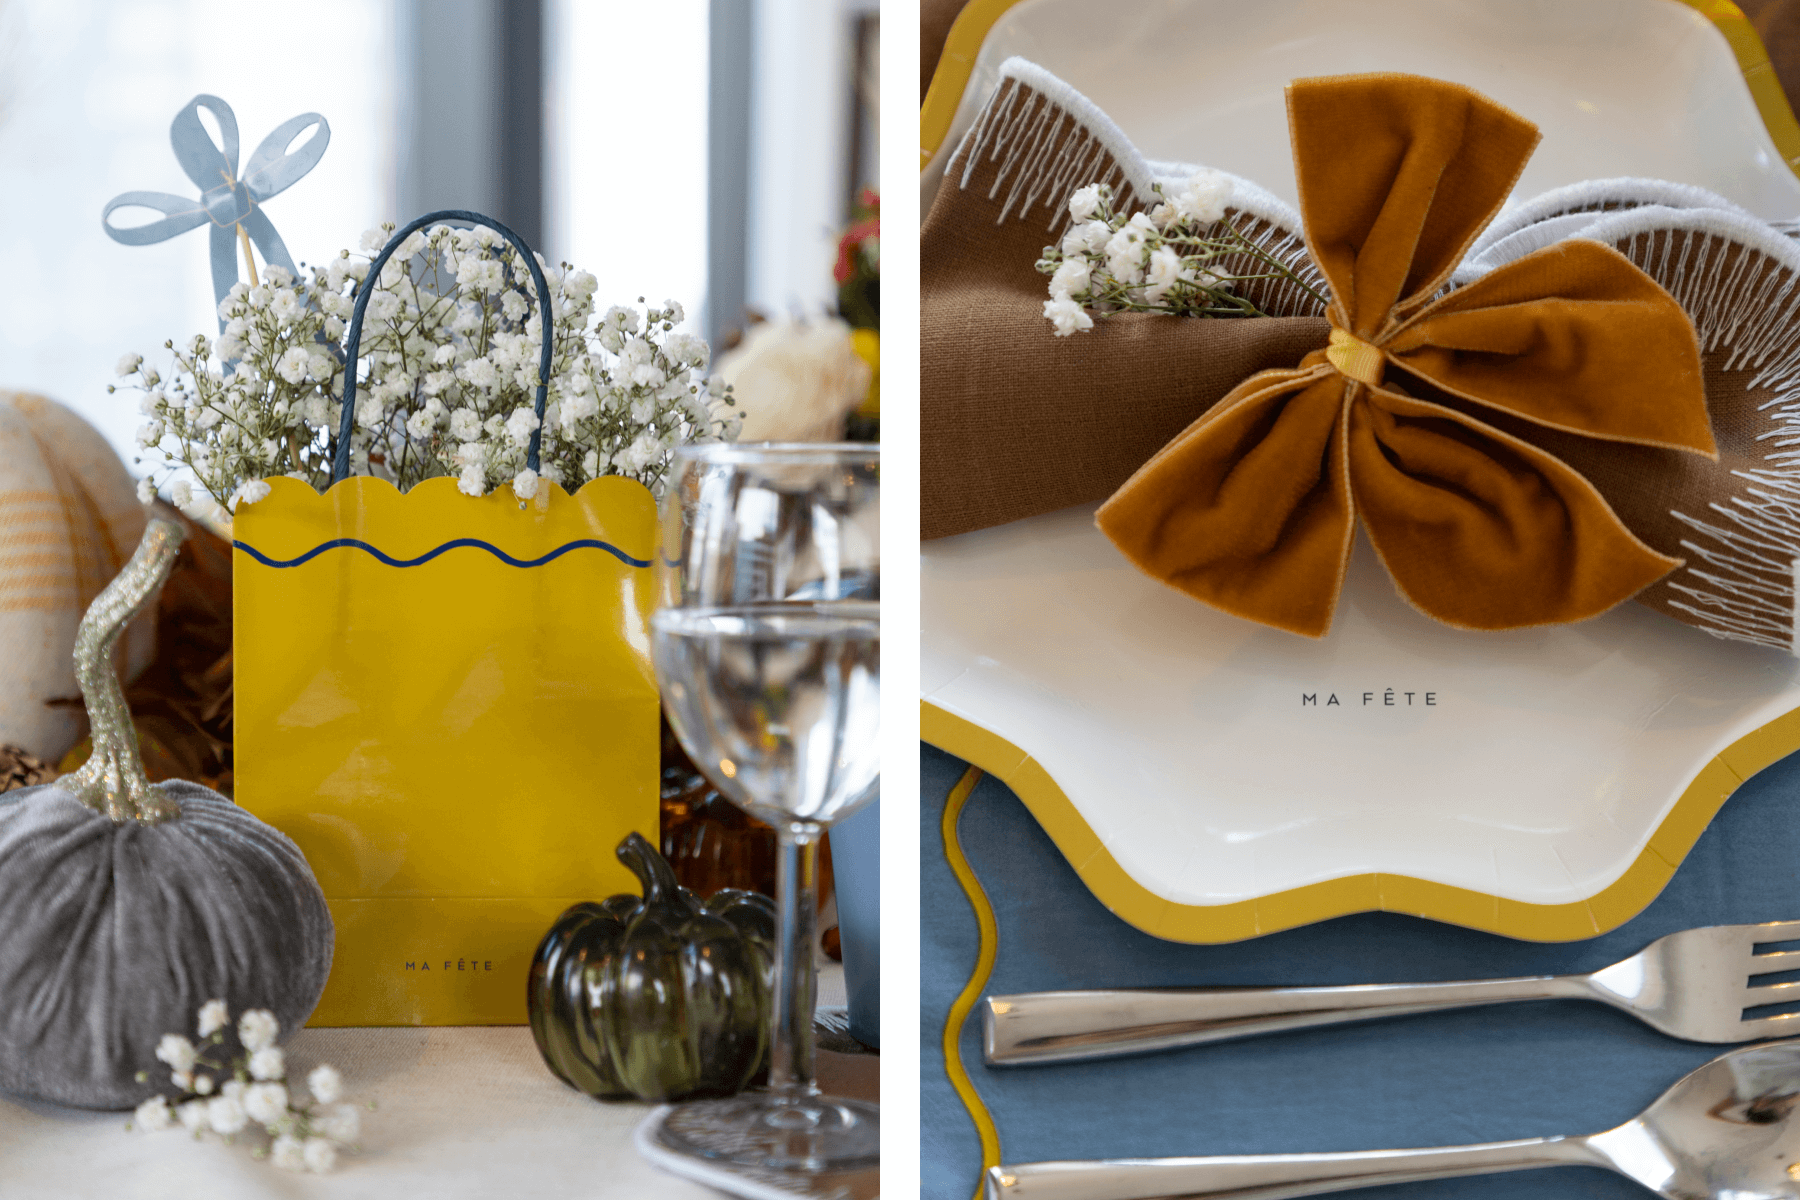 Left: A yellow gift bag filled with baby’s breath flowers and surrounded by gourd decorations.Right:A brown cloth napkin is secured with a russet velvet bow on a scalloped dish.